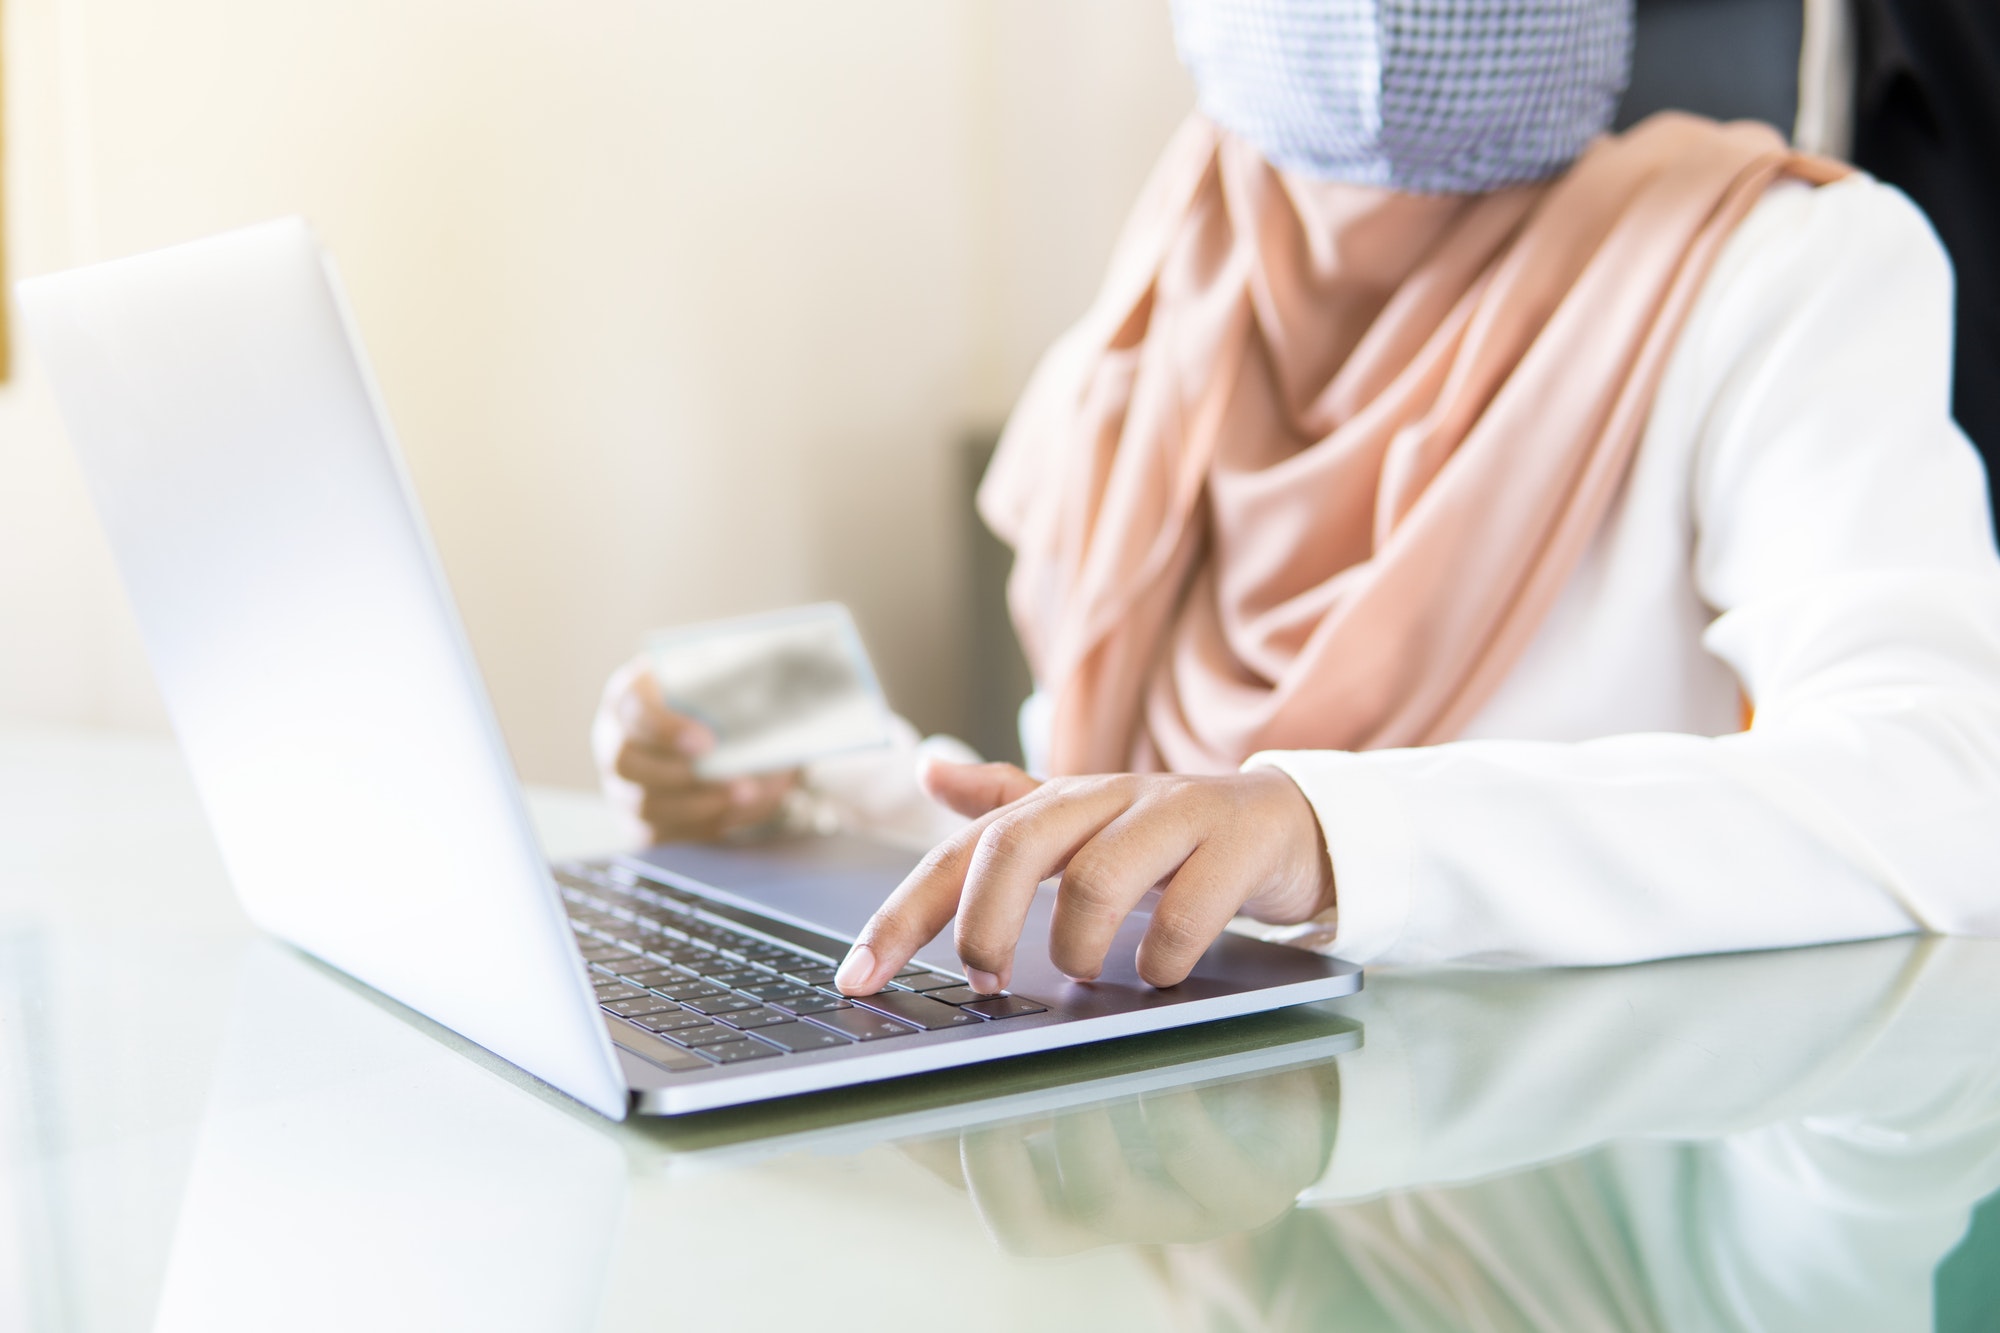 Hand business muslin women typing on laptop and credit card for payment online